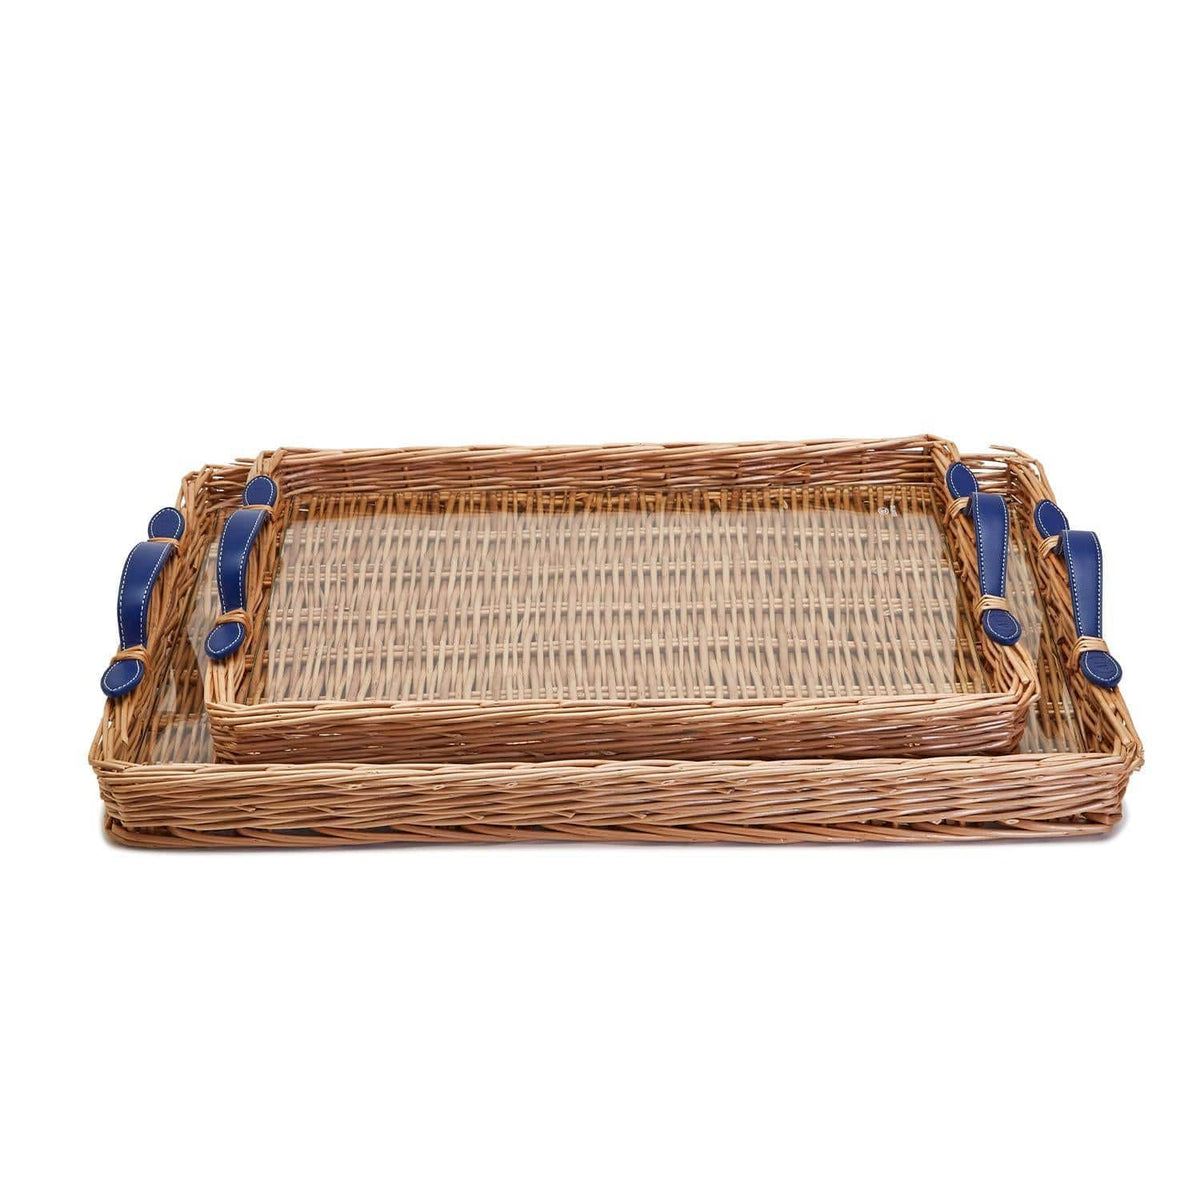 Wicker Rectangle Tray w/ Navy Handles and Acrylic Insert (2 sizes Available) - The Preppy Bunny